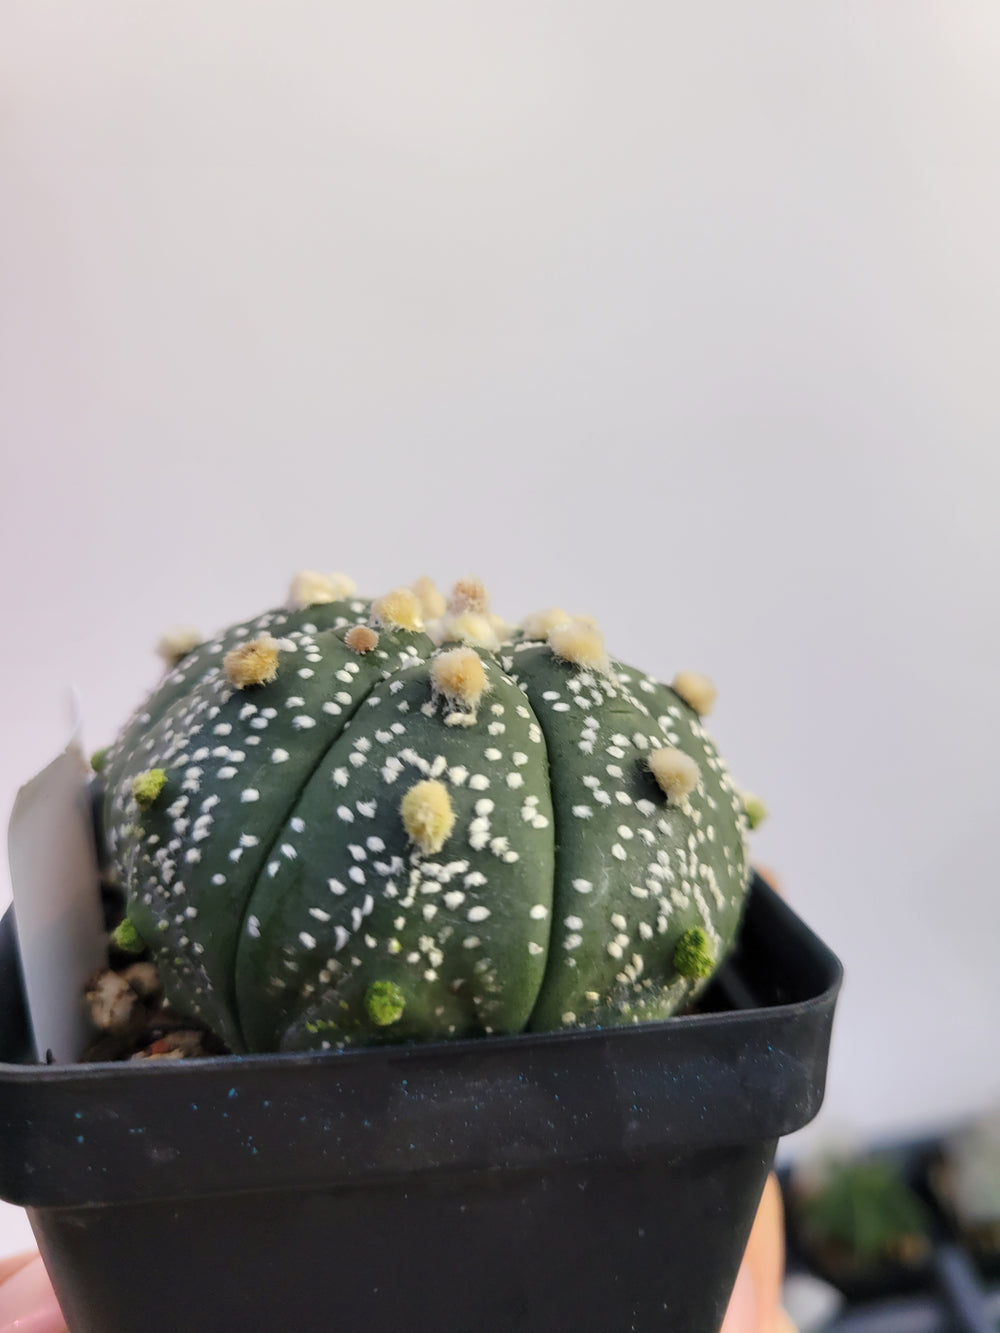 Astrophytum asterias cv. Superkabuto, rooted and established Deaw Cactus- Flowering Seed Grown #T24 - Nice Plants Good Pots